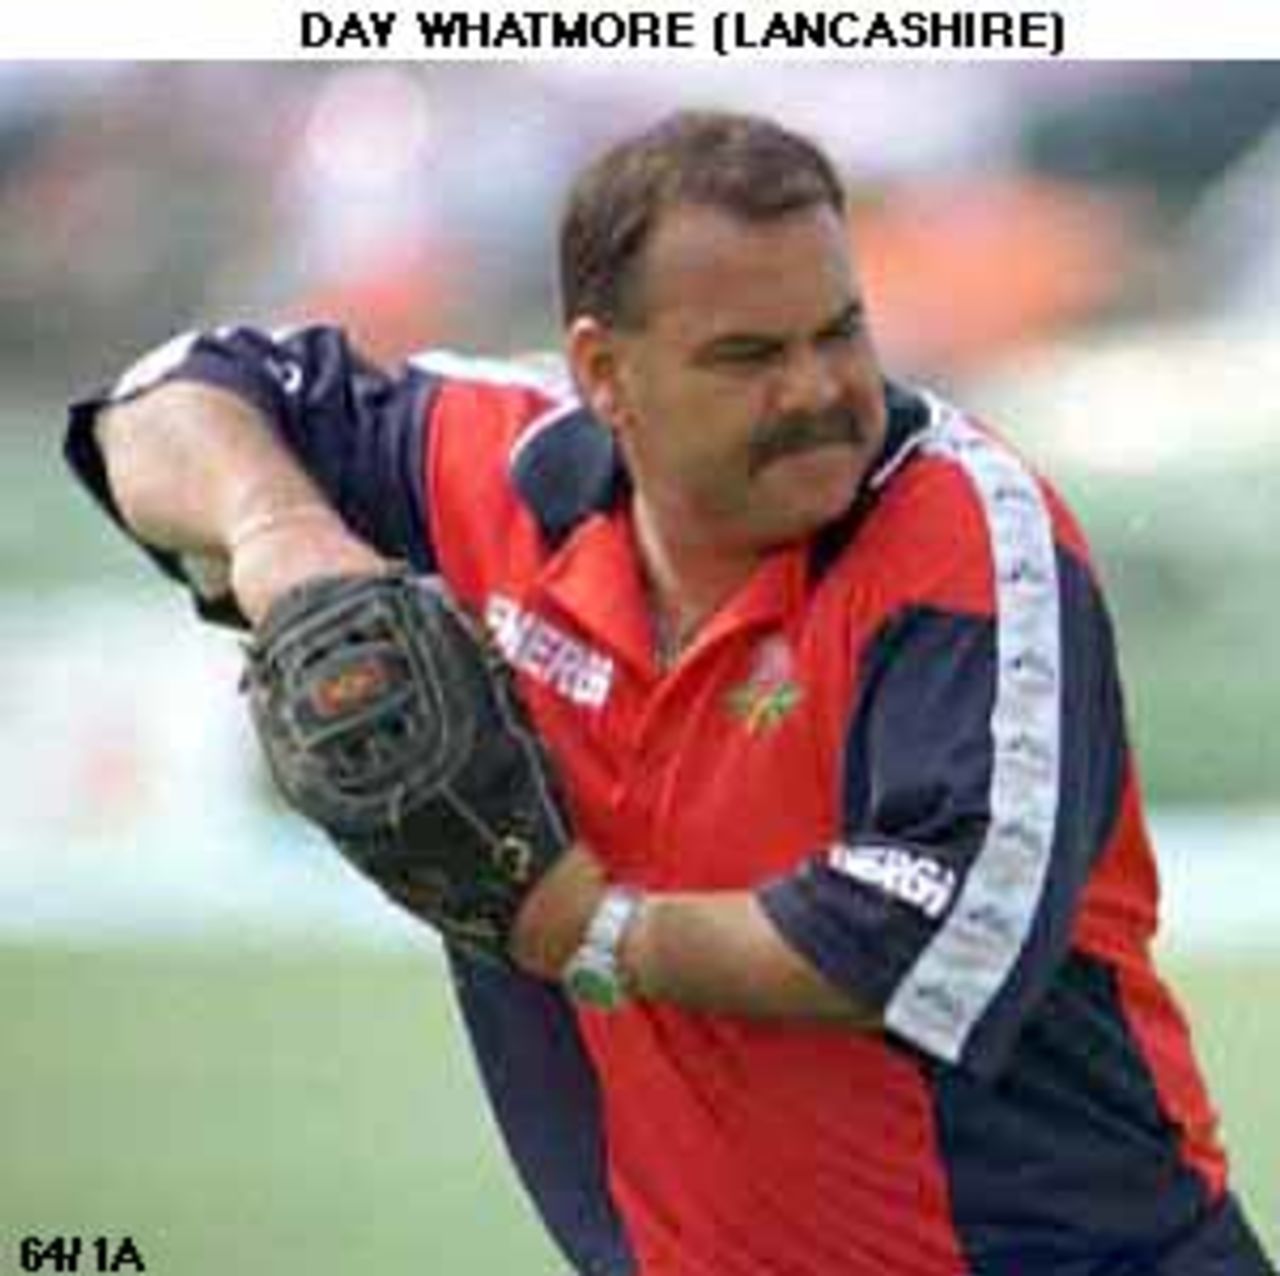 Dave Whatmore